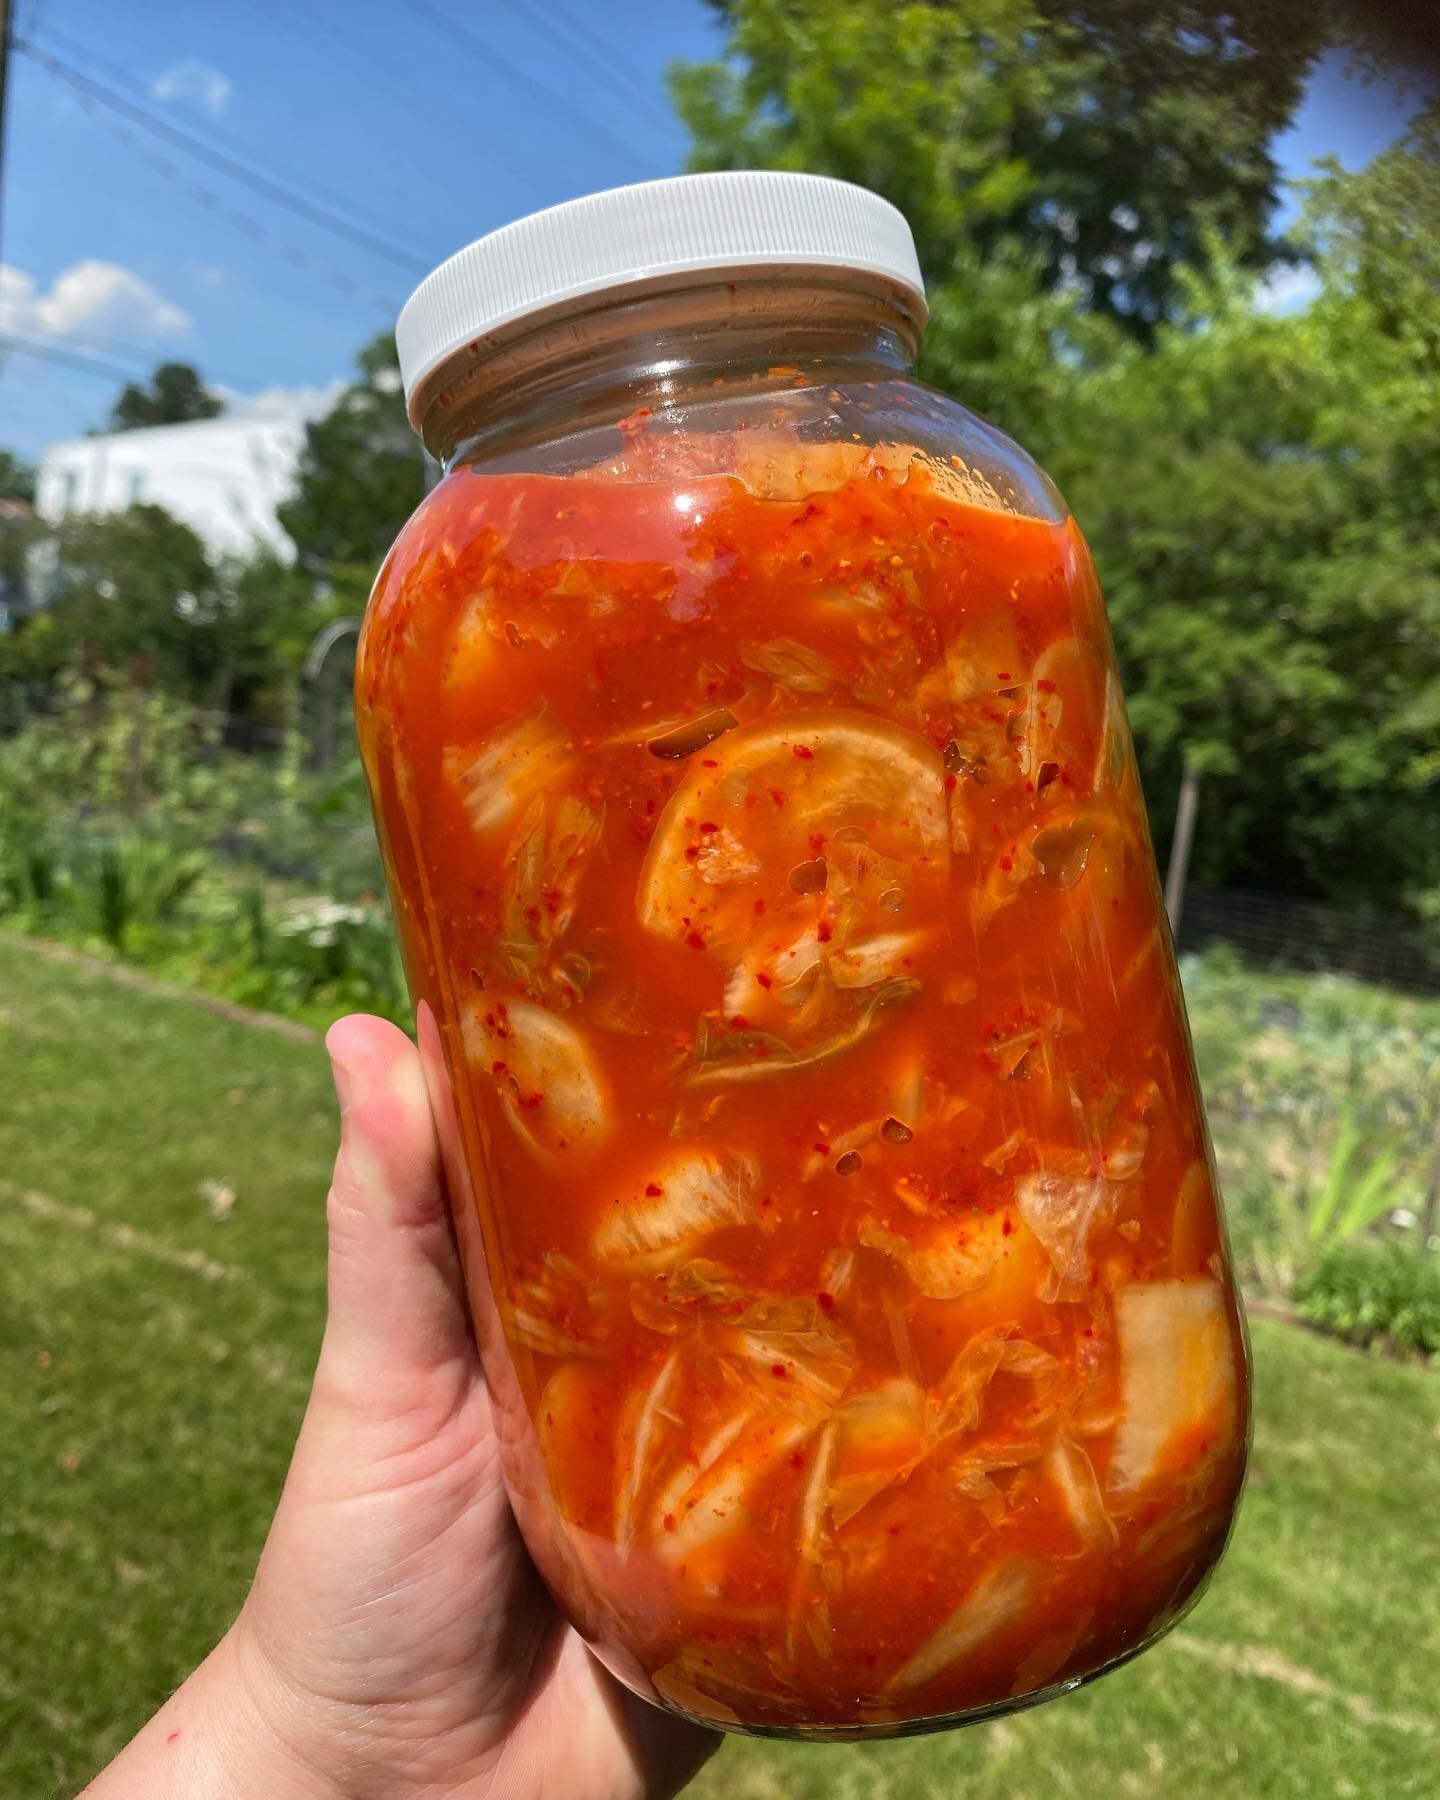 Fresh, local Kimchi coming in hot!

Own a food service establishment? Let&rsquo;s get your customers quality, real fermented foods - on your plates and in their bellies! 

#kimchi #originalkimchi #localferments #richmondrestaurants #goodfoods